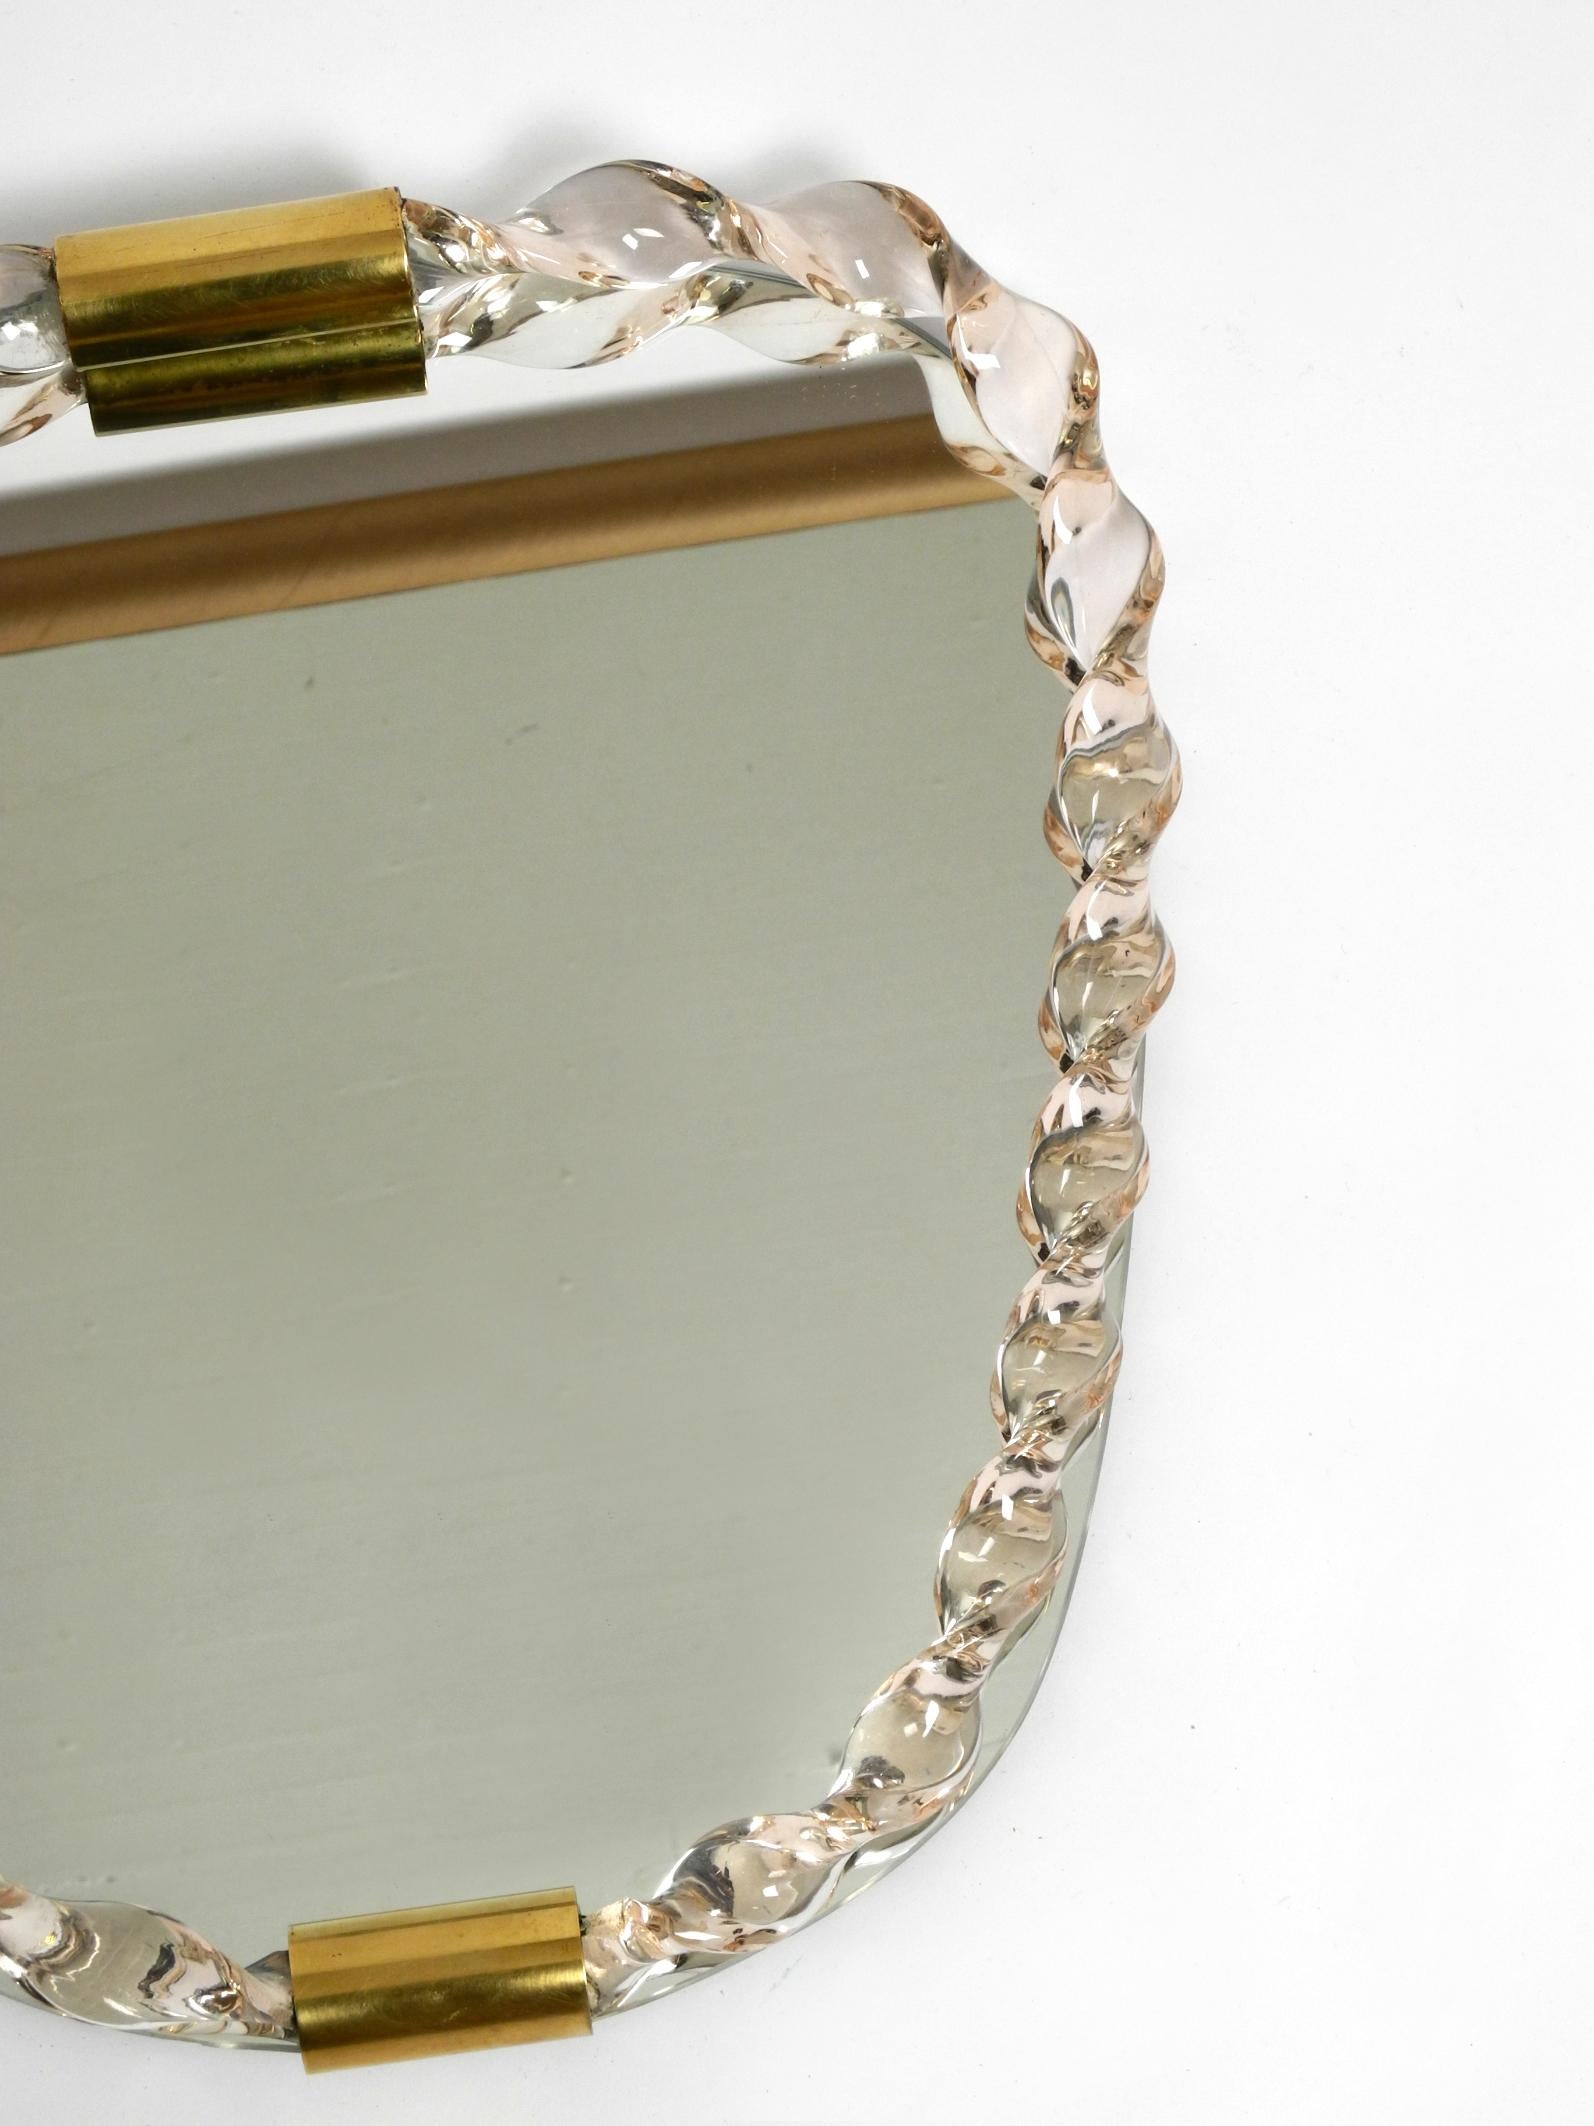 Fantastically beautiful 1960s wall mirror with a heavy Murano glass frame 6